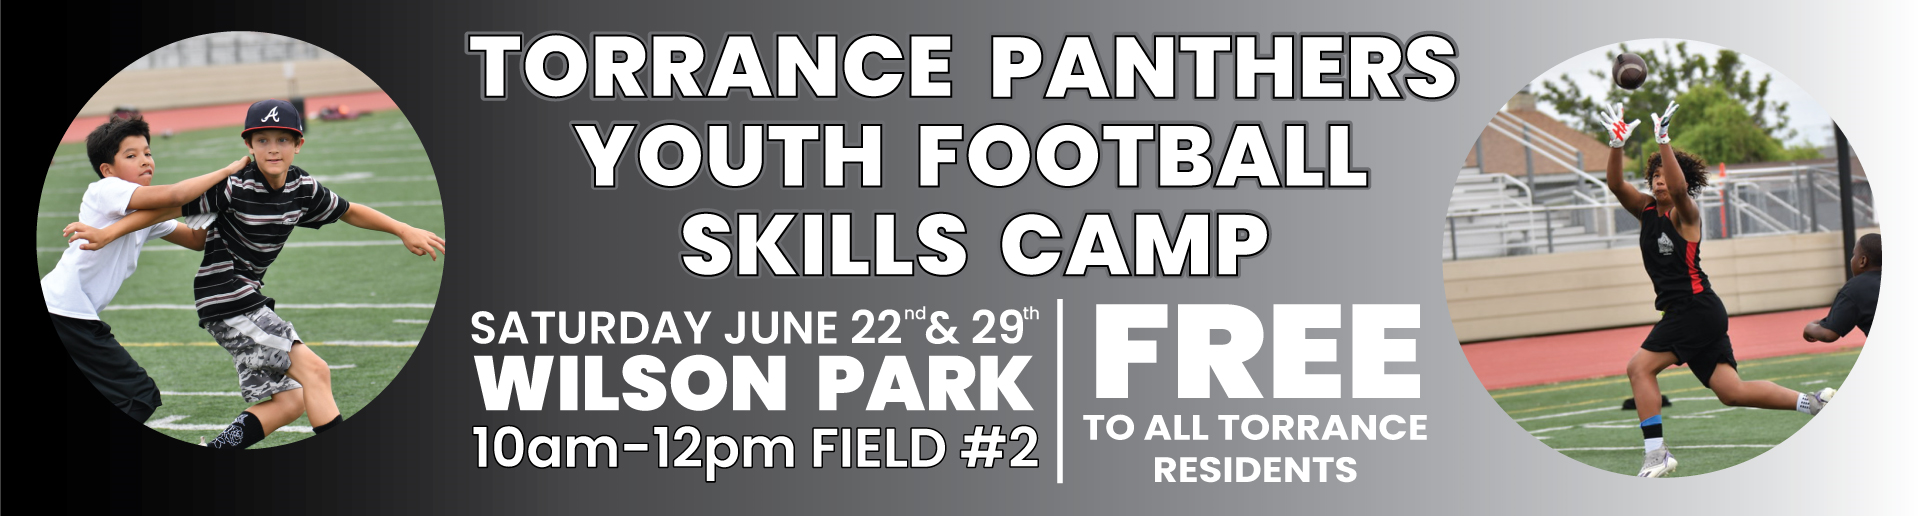 FREE YOUTH CAMP